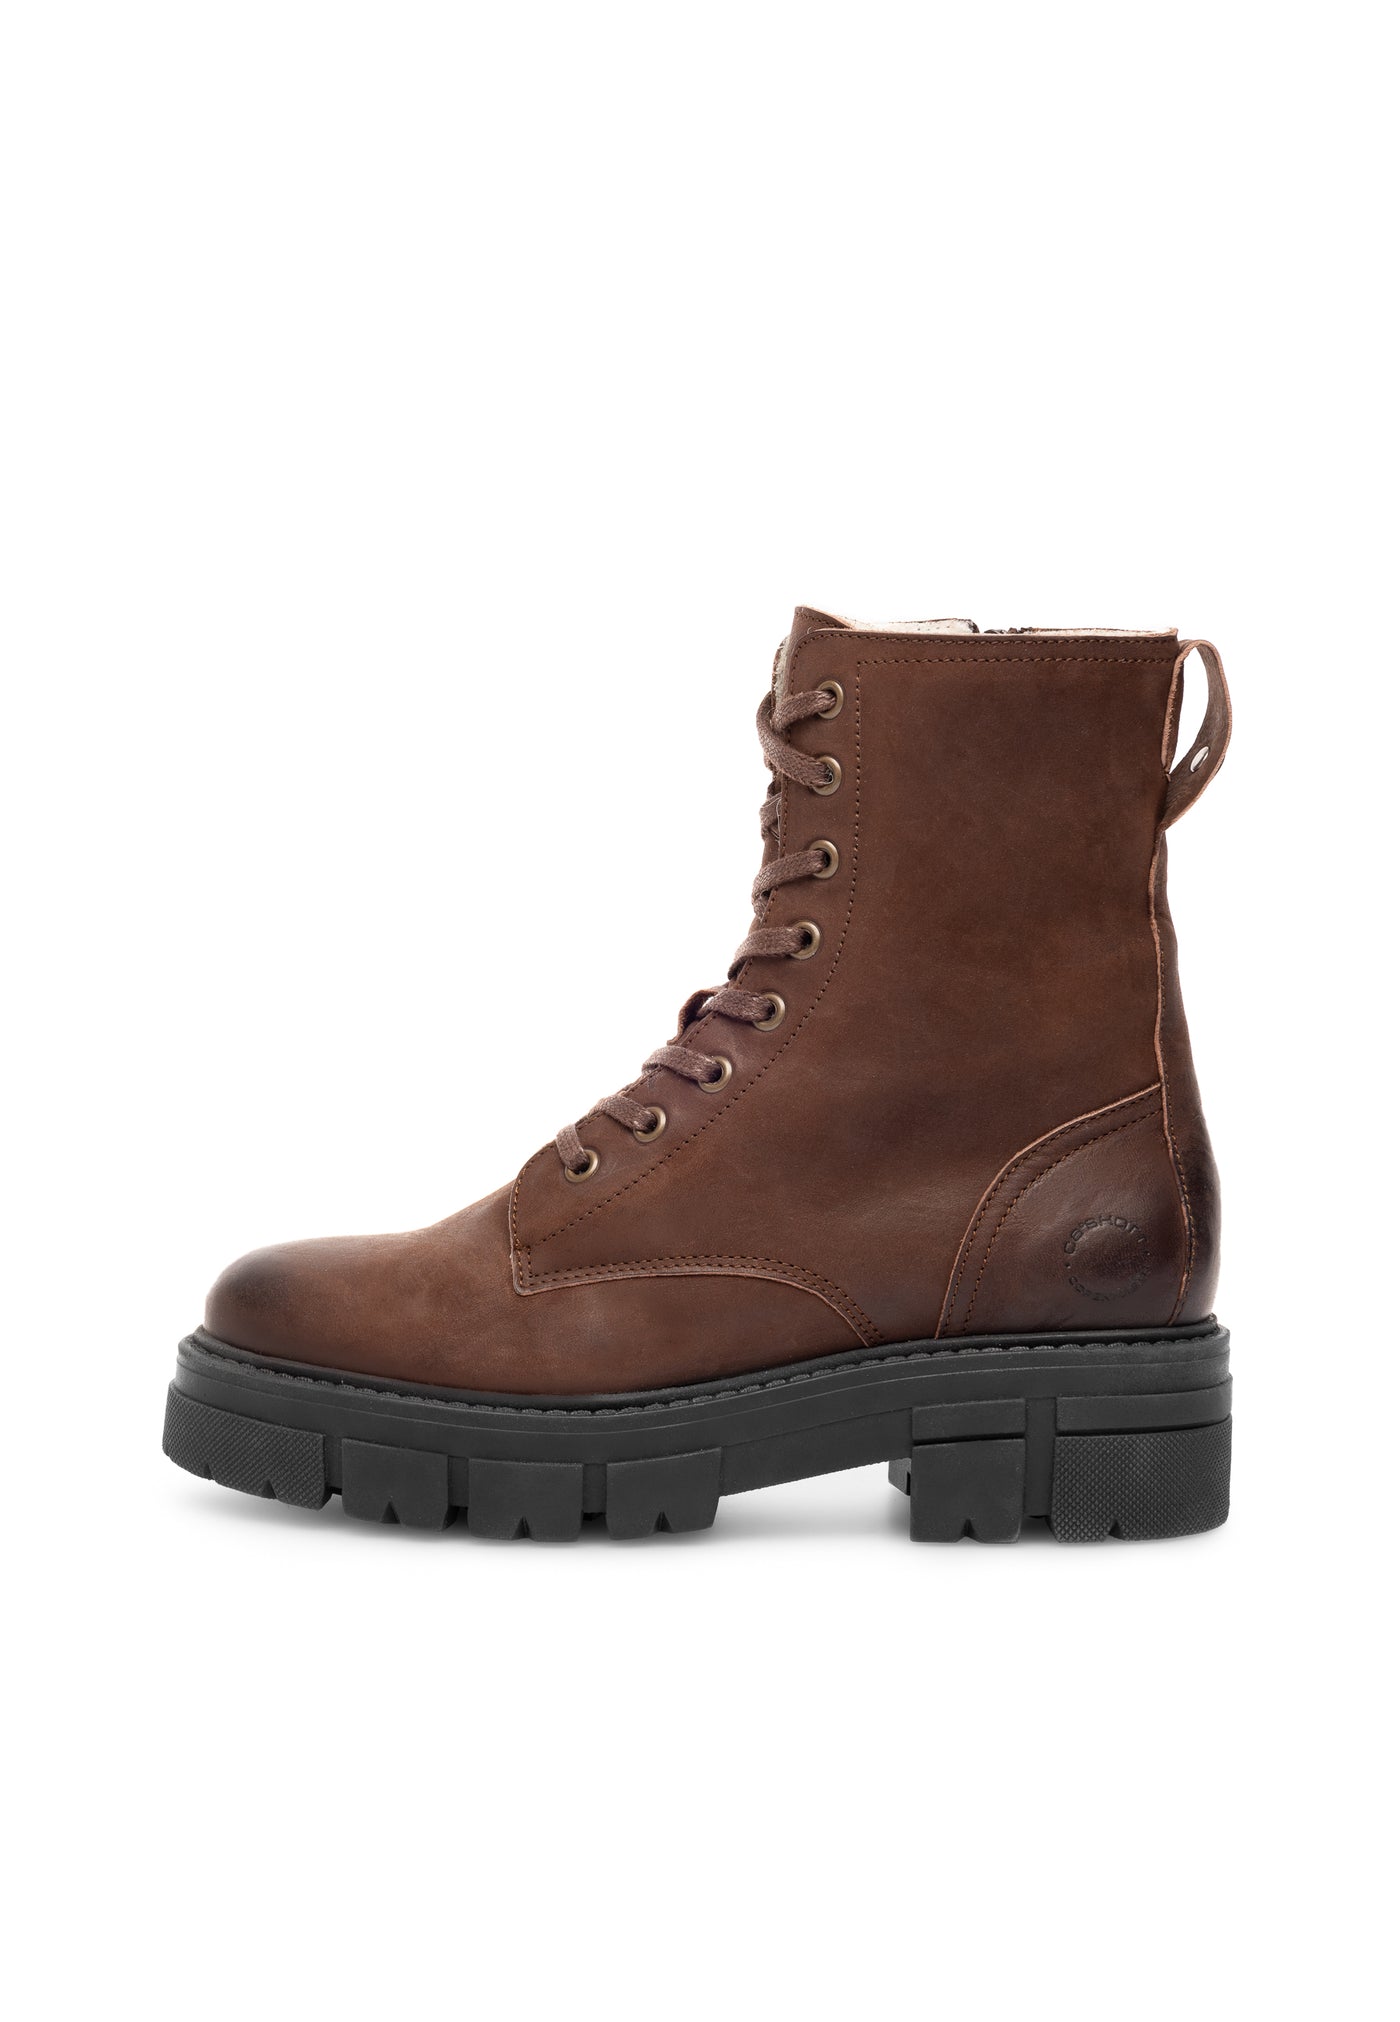 CASHOTT CASJIDA Lace Boot Warm Lined Water Repellent Nubuck Vegetable Tanned Lace Up Coffee